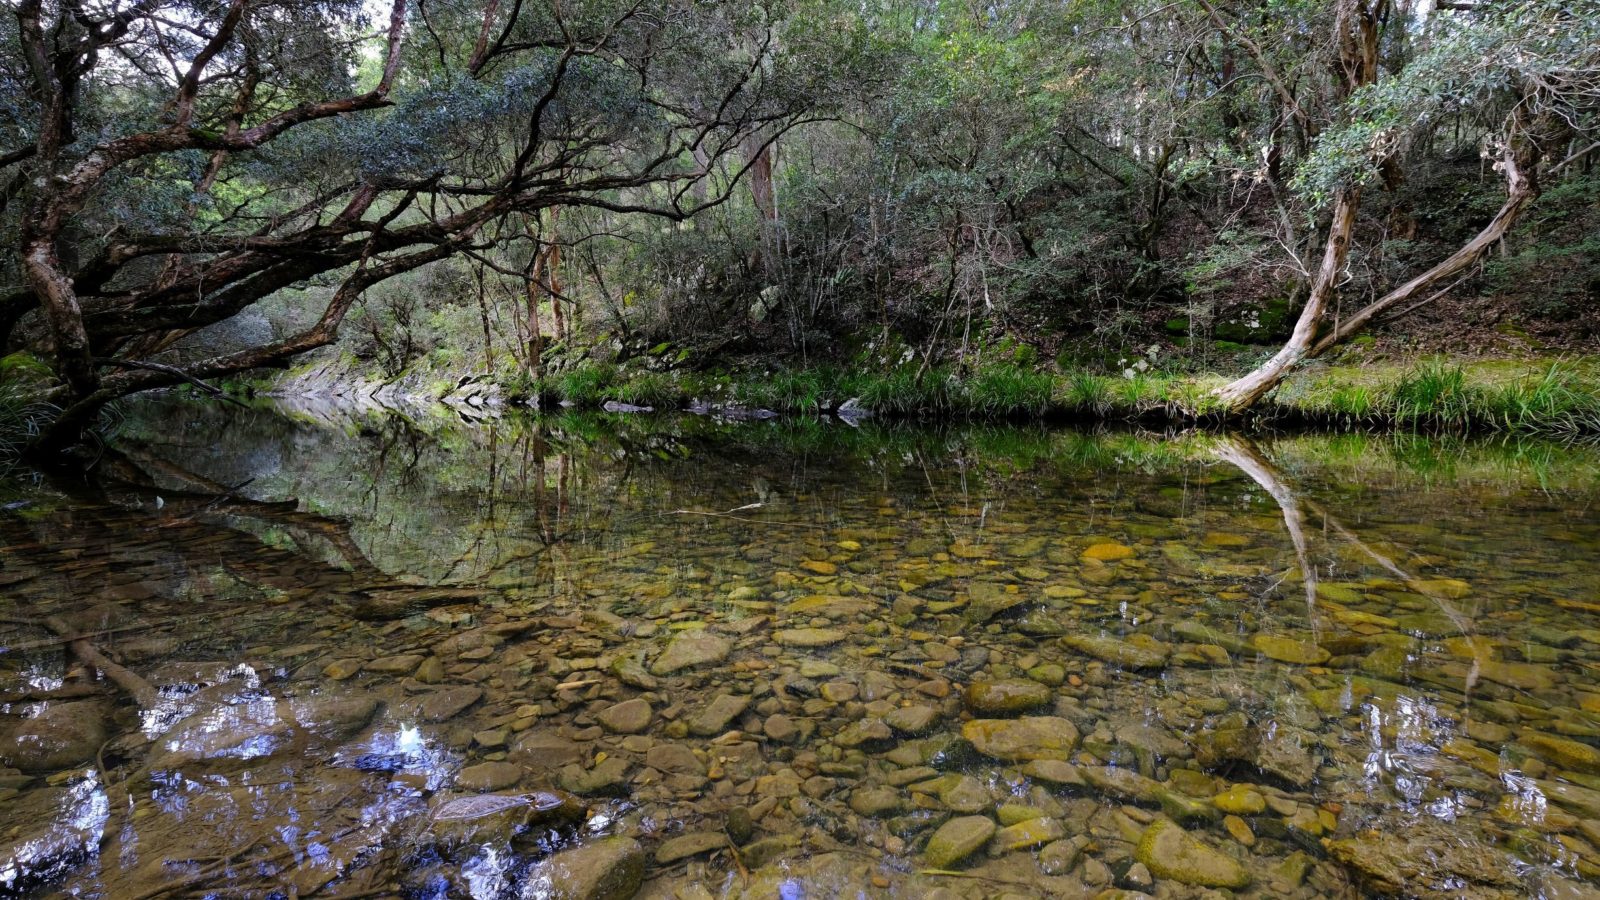 Listen to the trickle of the Gloucester River from your tent